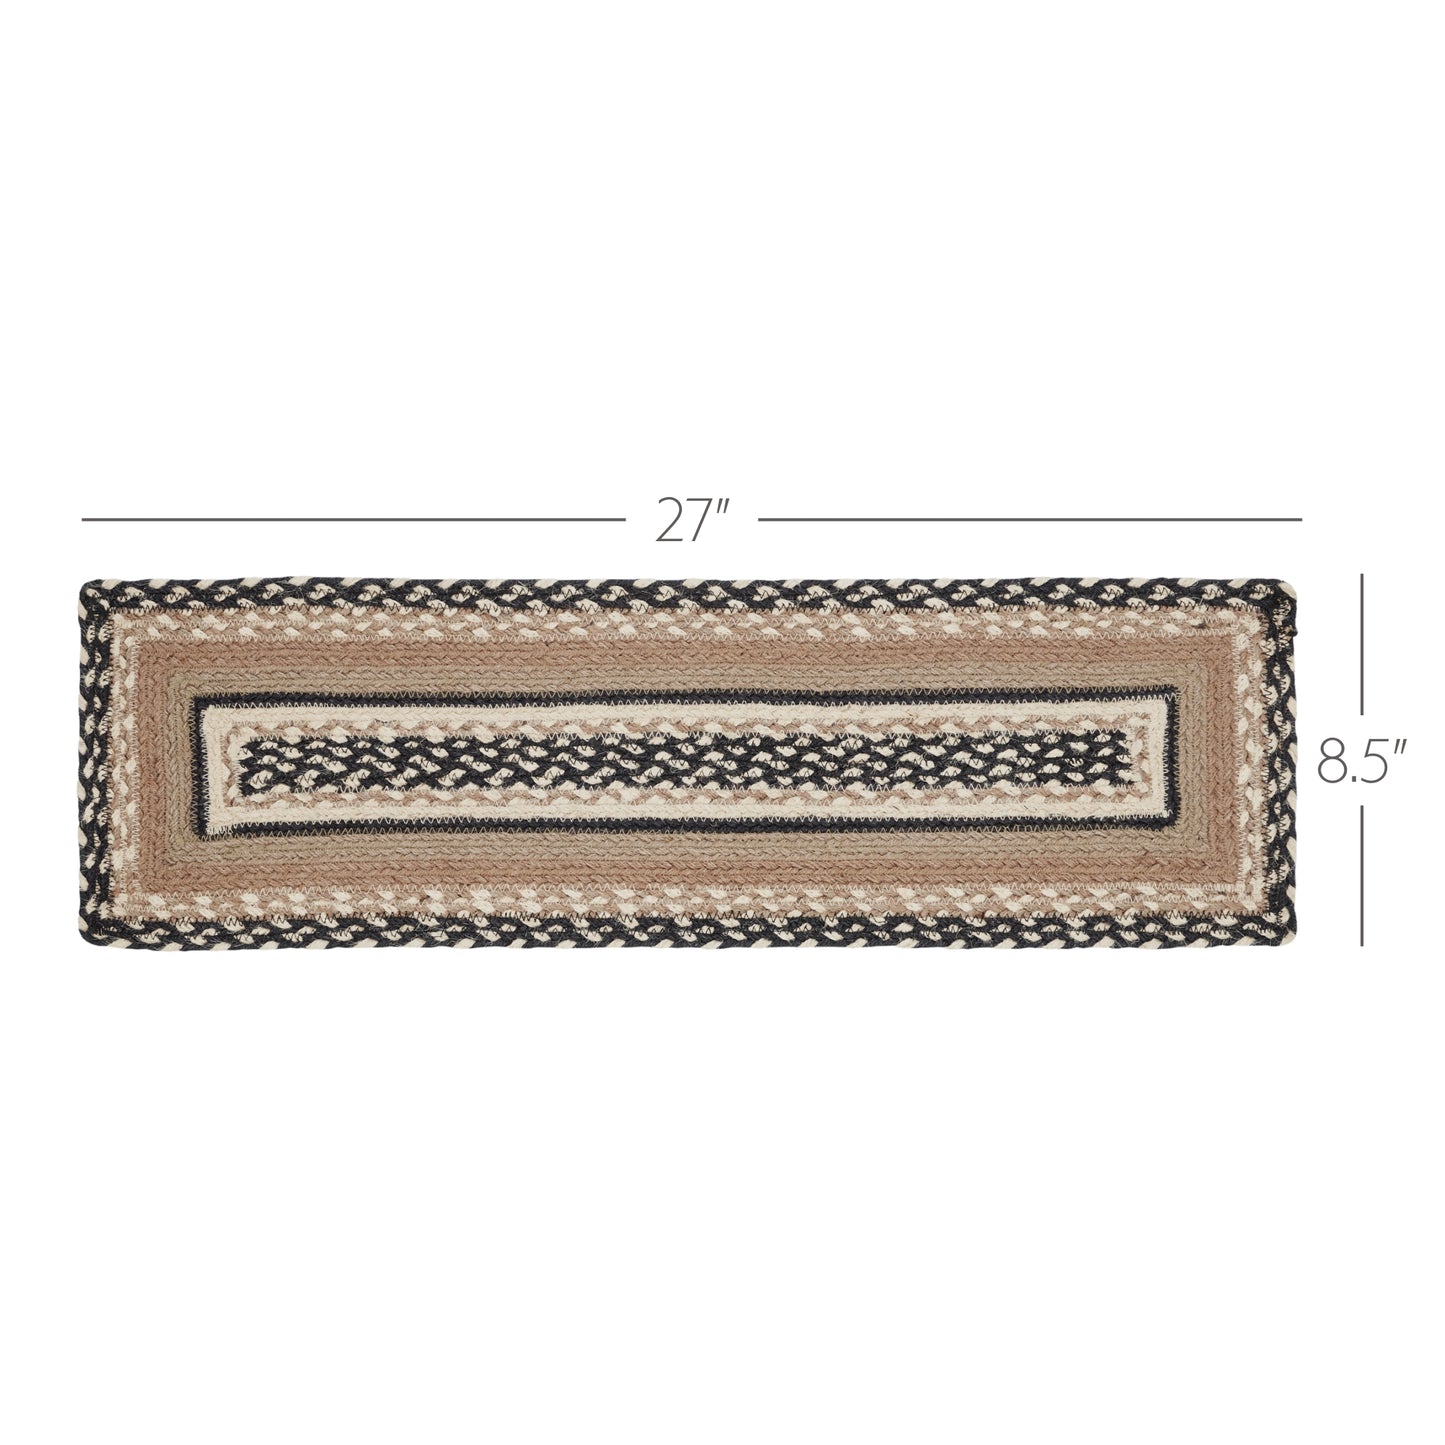 81456-Sawyer-Mill-Charcoal-Creme-Jute-Stair-Tread-Rect-Latex-8.5x27-image-1